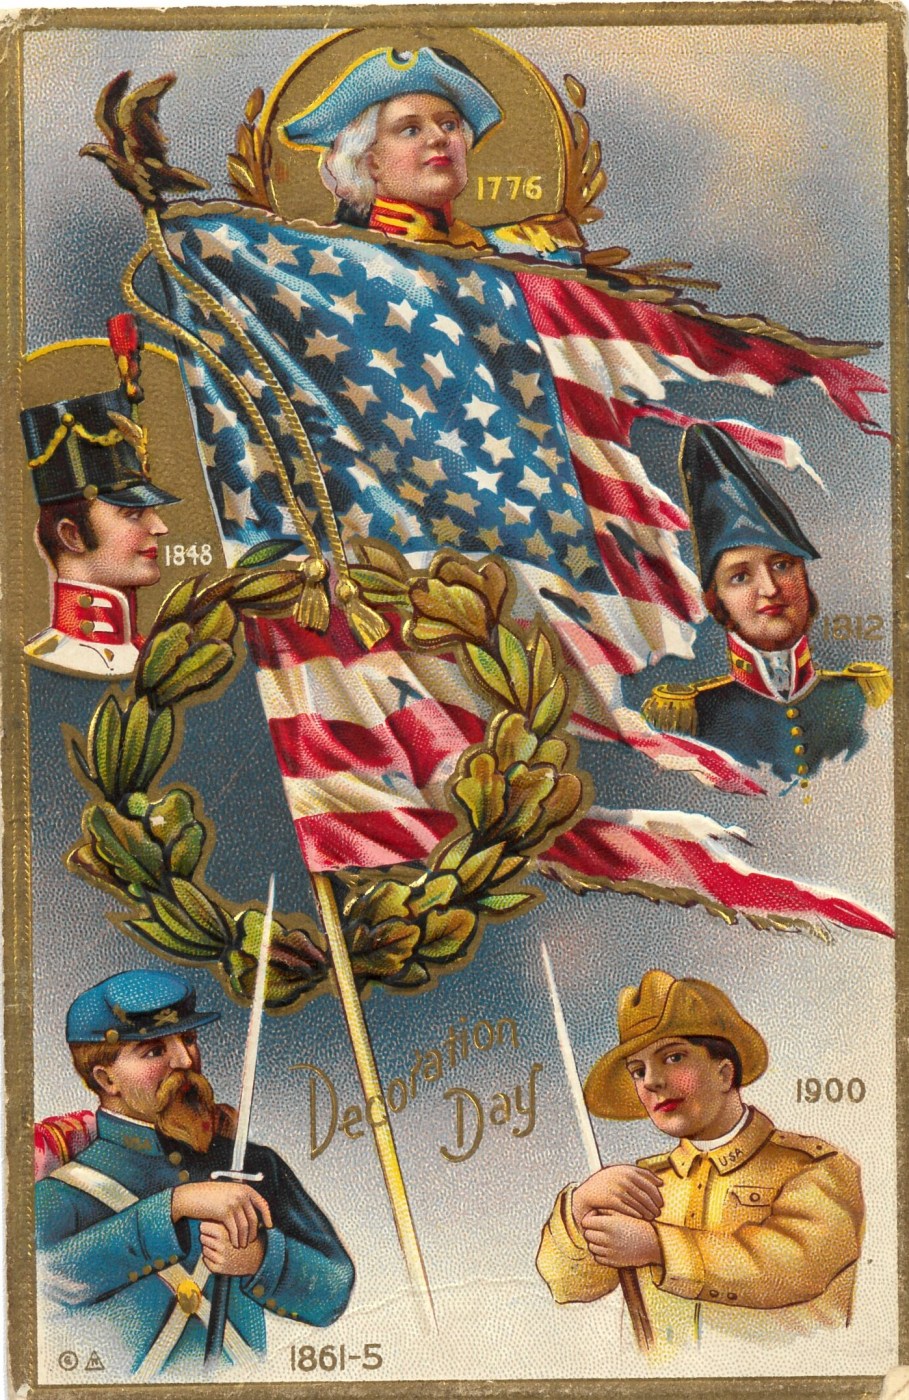 “Decoration Day 1776 / 1812 / 1848 / 1861-5 / 1900,” Decoration Day Series No. 3. Cancelled May 28, 1913. Gold highlights, embossed, E. Nash Co., NY, 1910. (NCA)